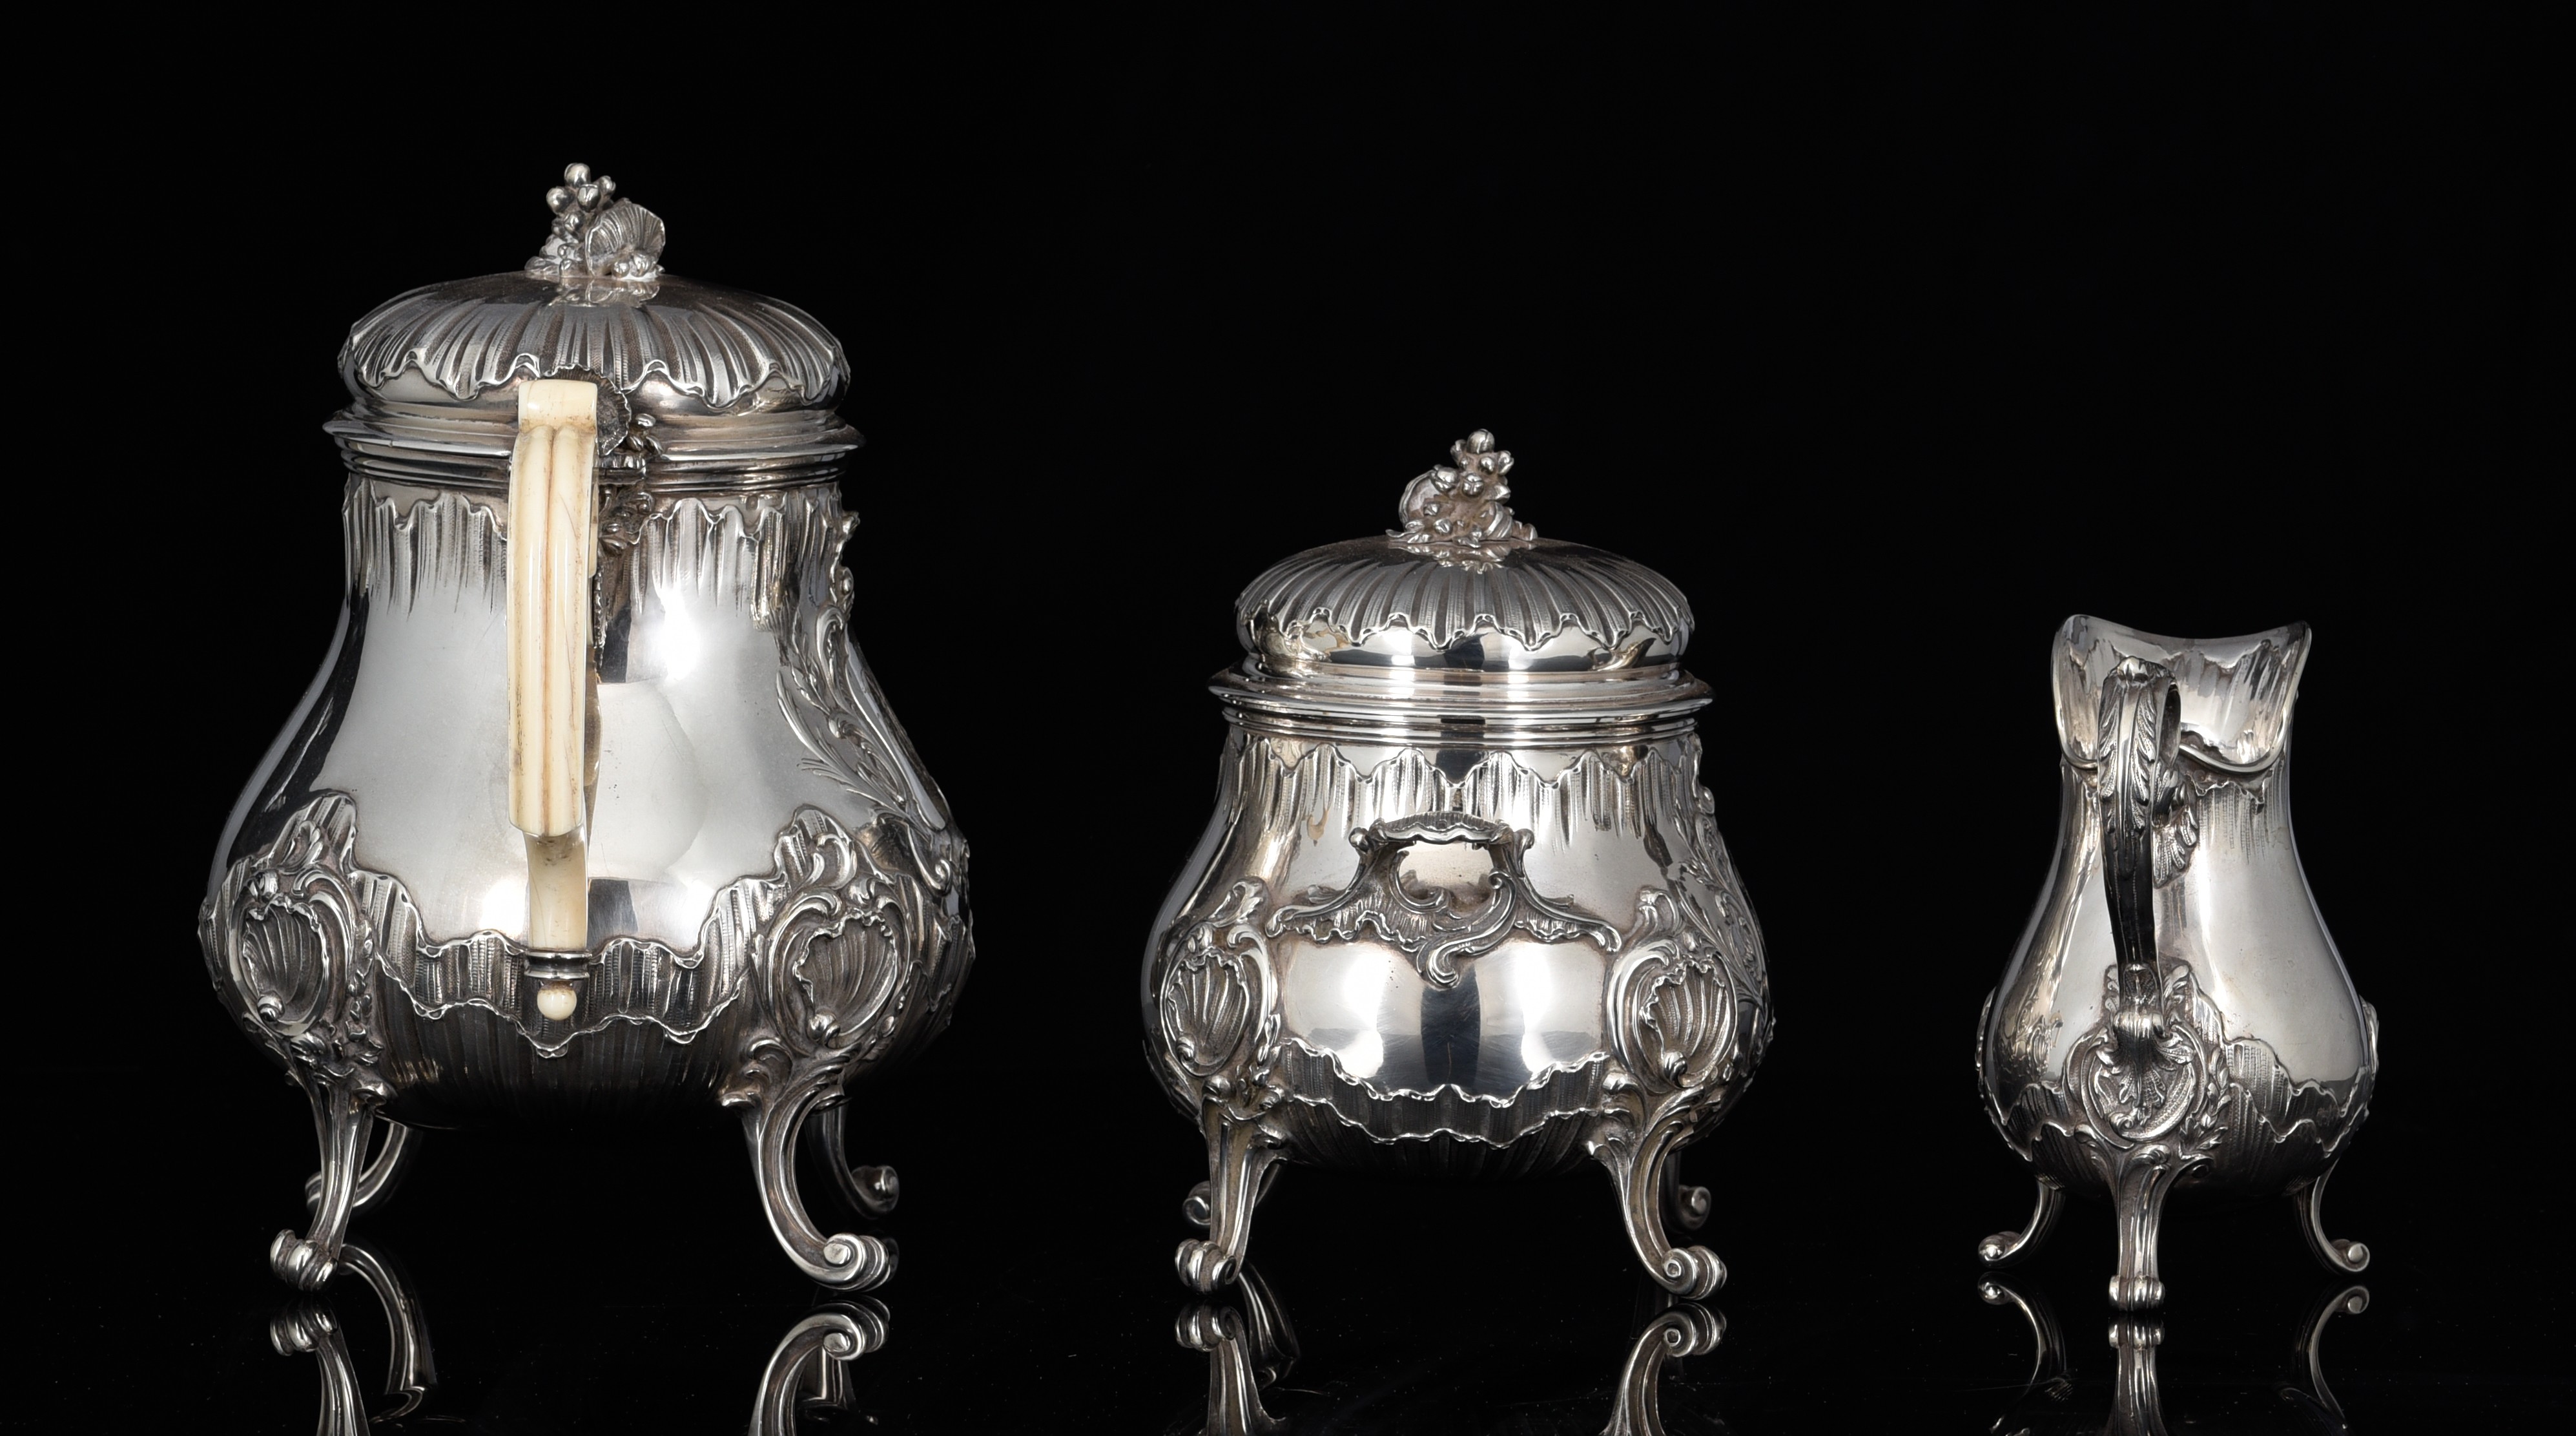 A French three-part silver Rococo Revival coffee set, 950/000, H 13,5 - 22,5 cm, c 1980 g - Image 5 of 7